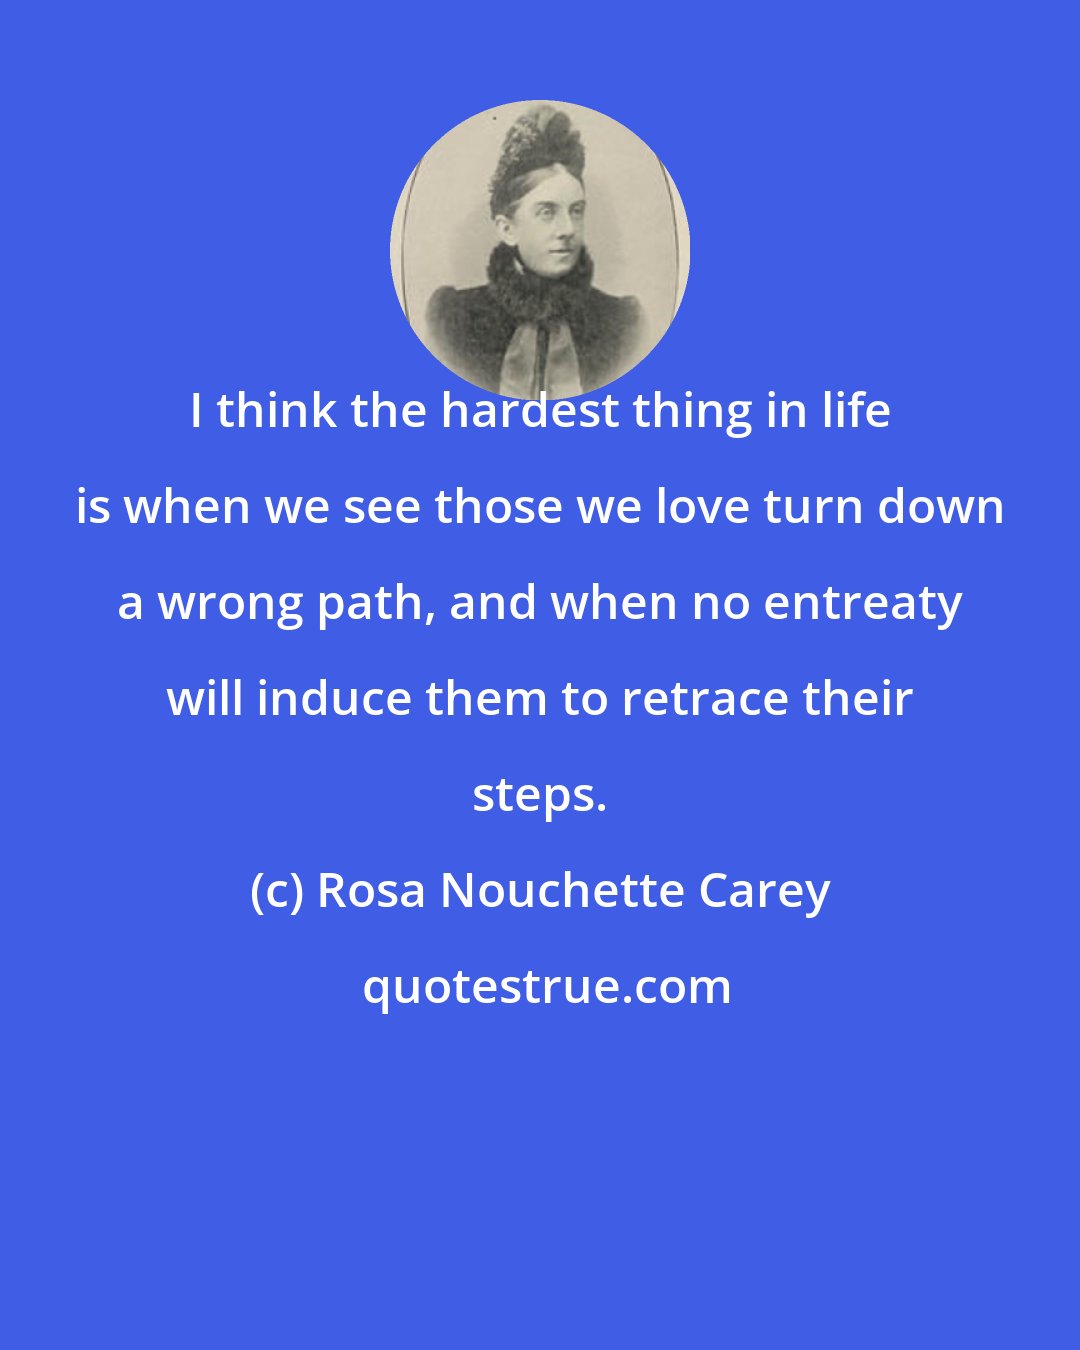 Rosa Nouchette Carey: I think the hardest thing in life is when we see those we love turn down a wrong path, and when no entreaty will induce them to retrace their steps.